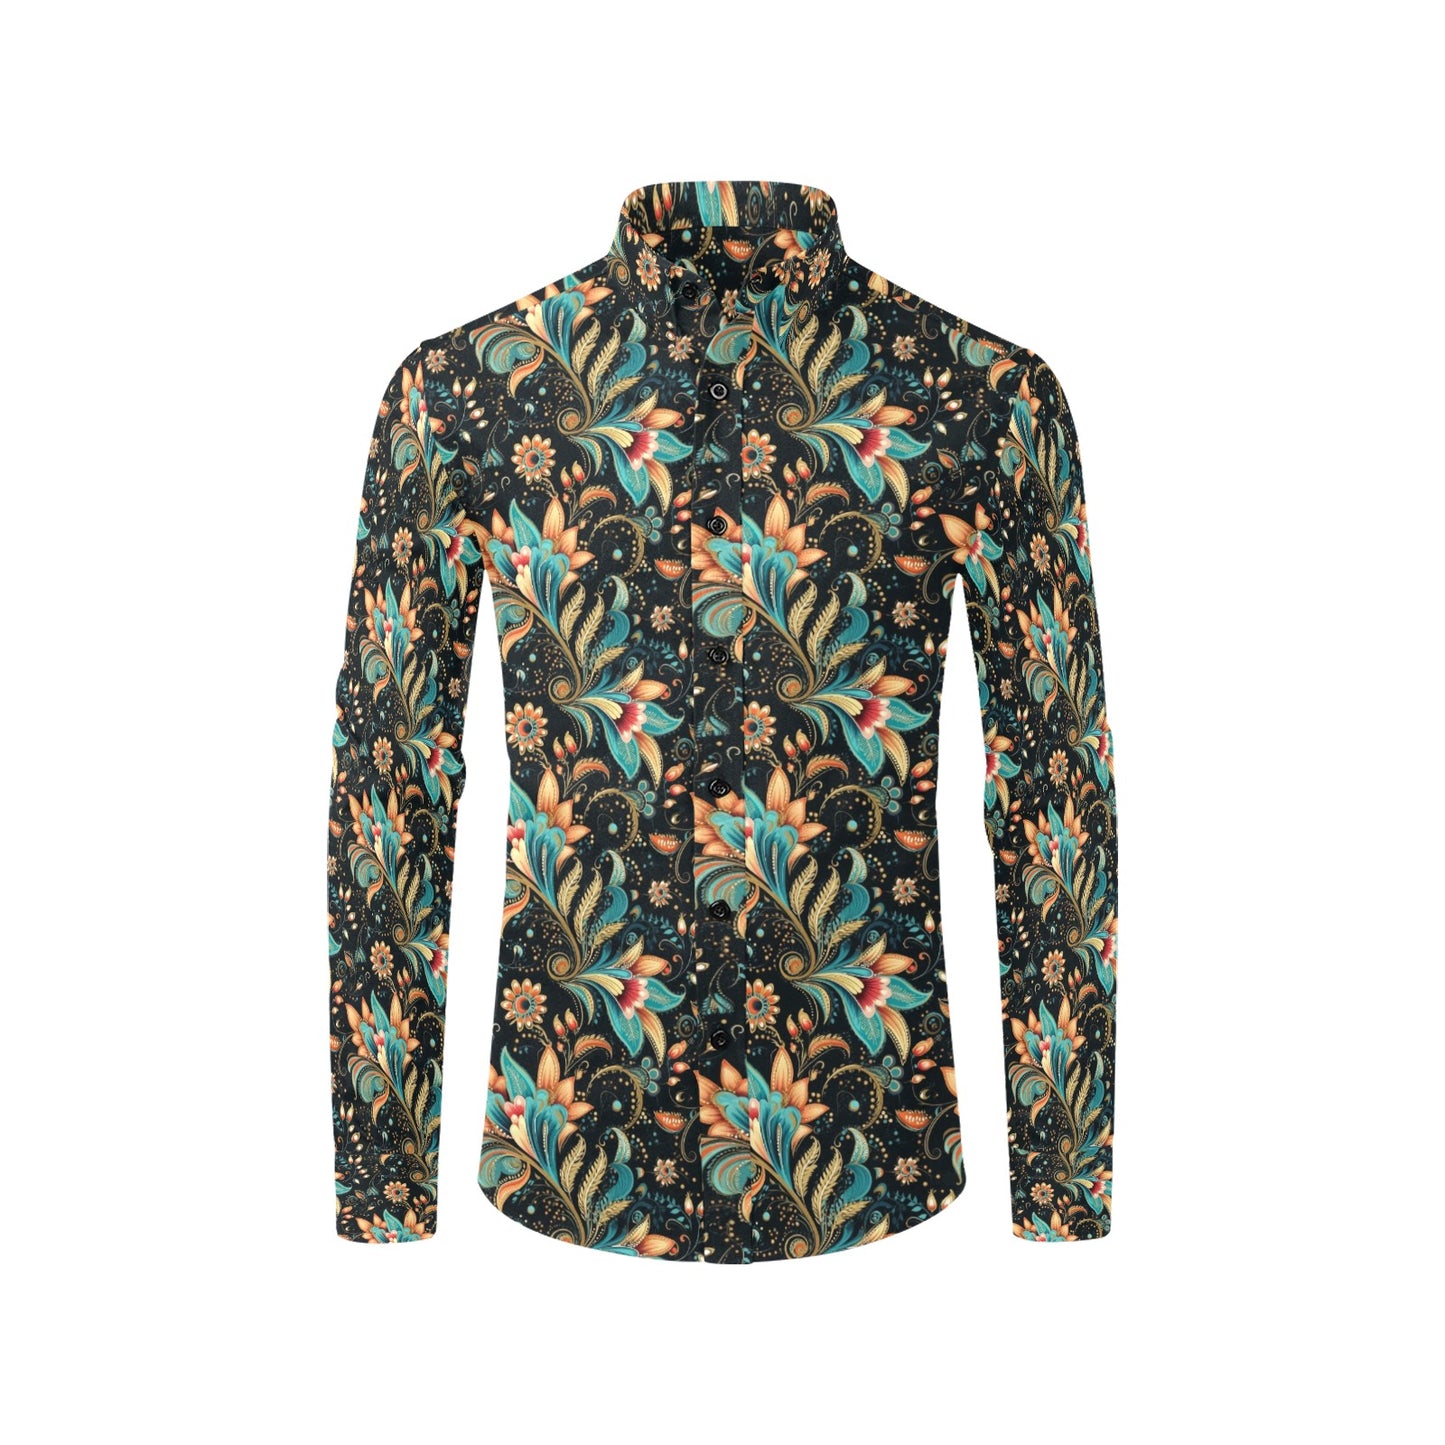 Floral Paisley Long Sleeve Men Button Up Shirt, Vintage Retro Boho Print Buttoned Down Collar Casual Dress Shirt with Chest Pocket Starcove Fashion